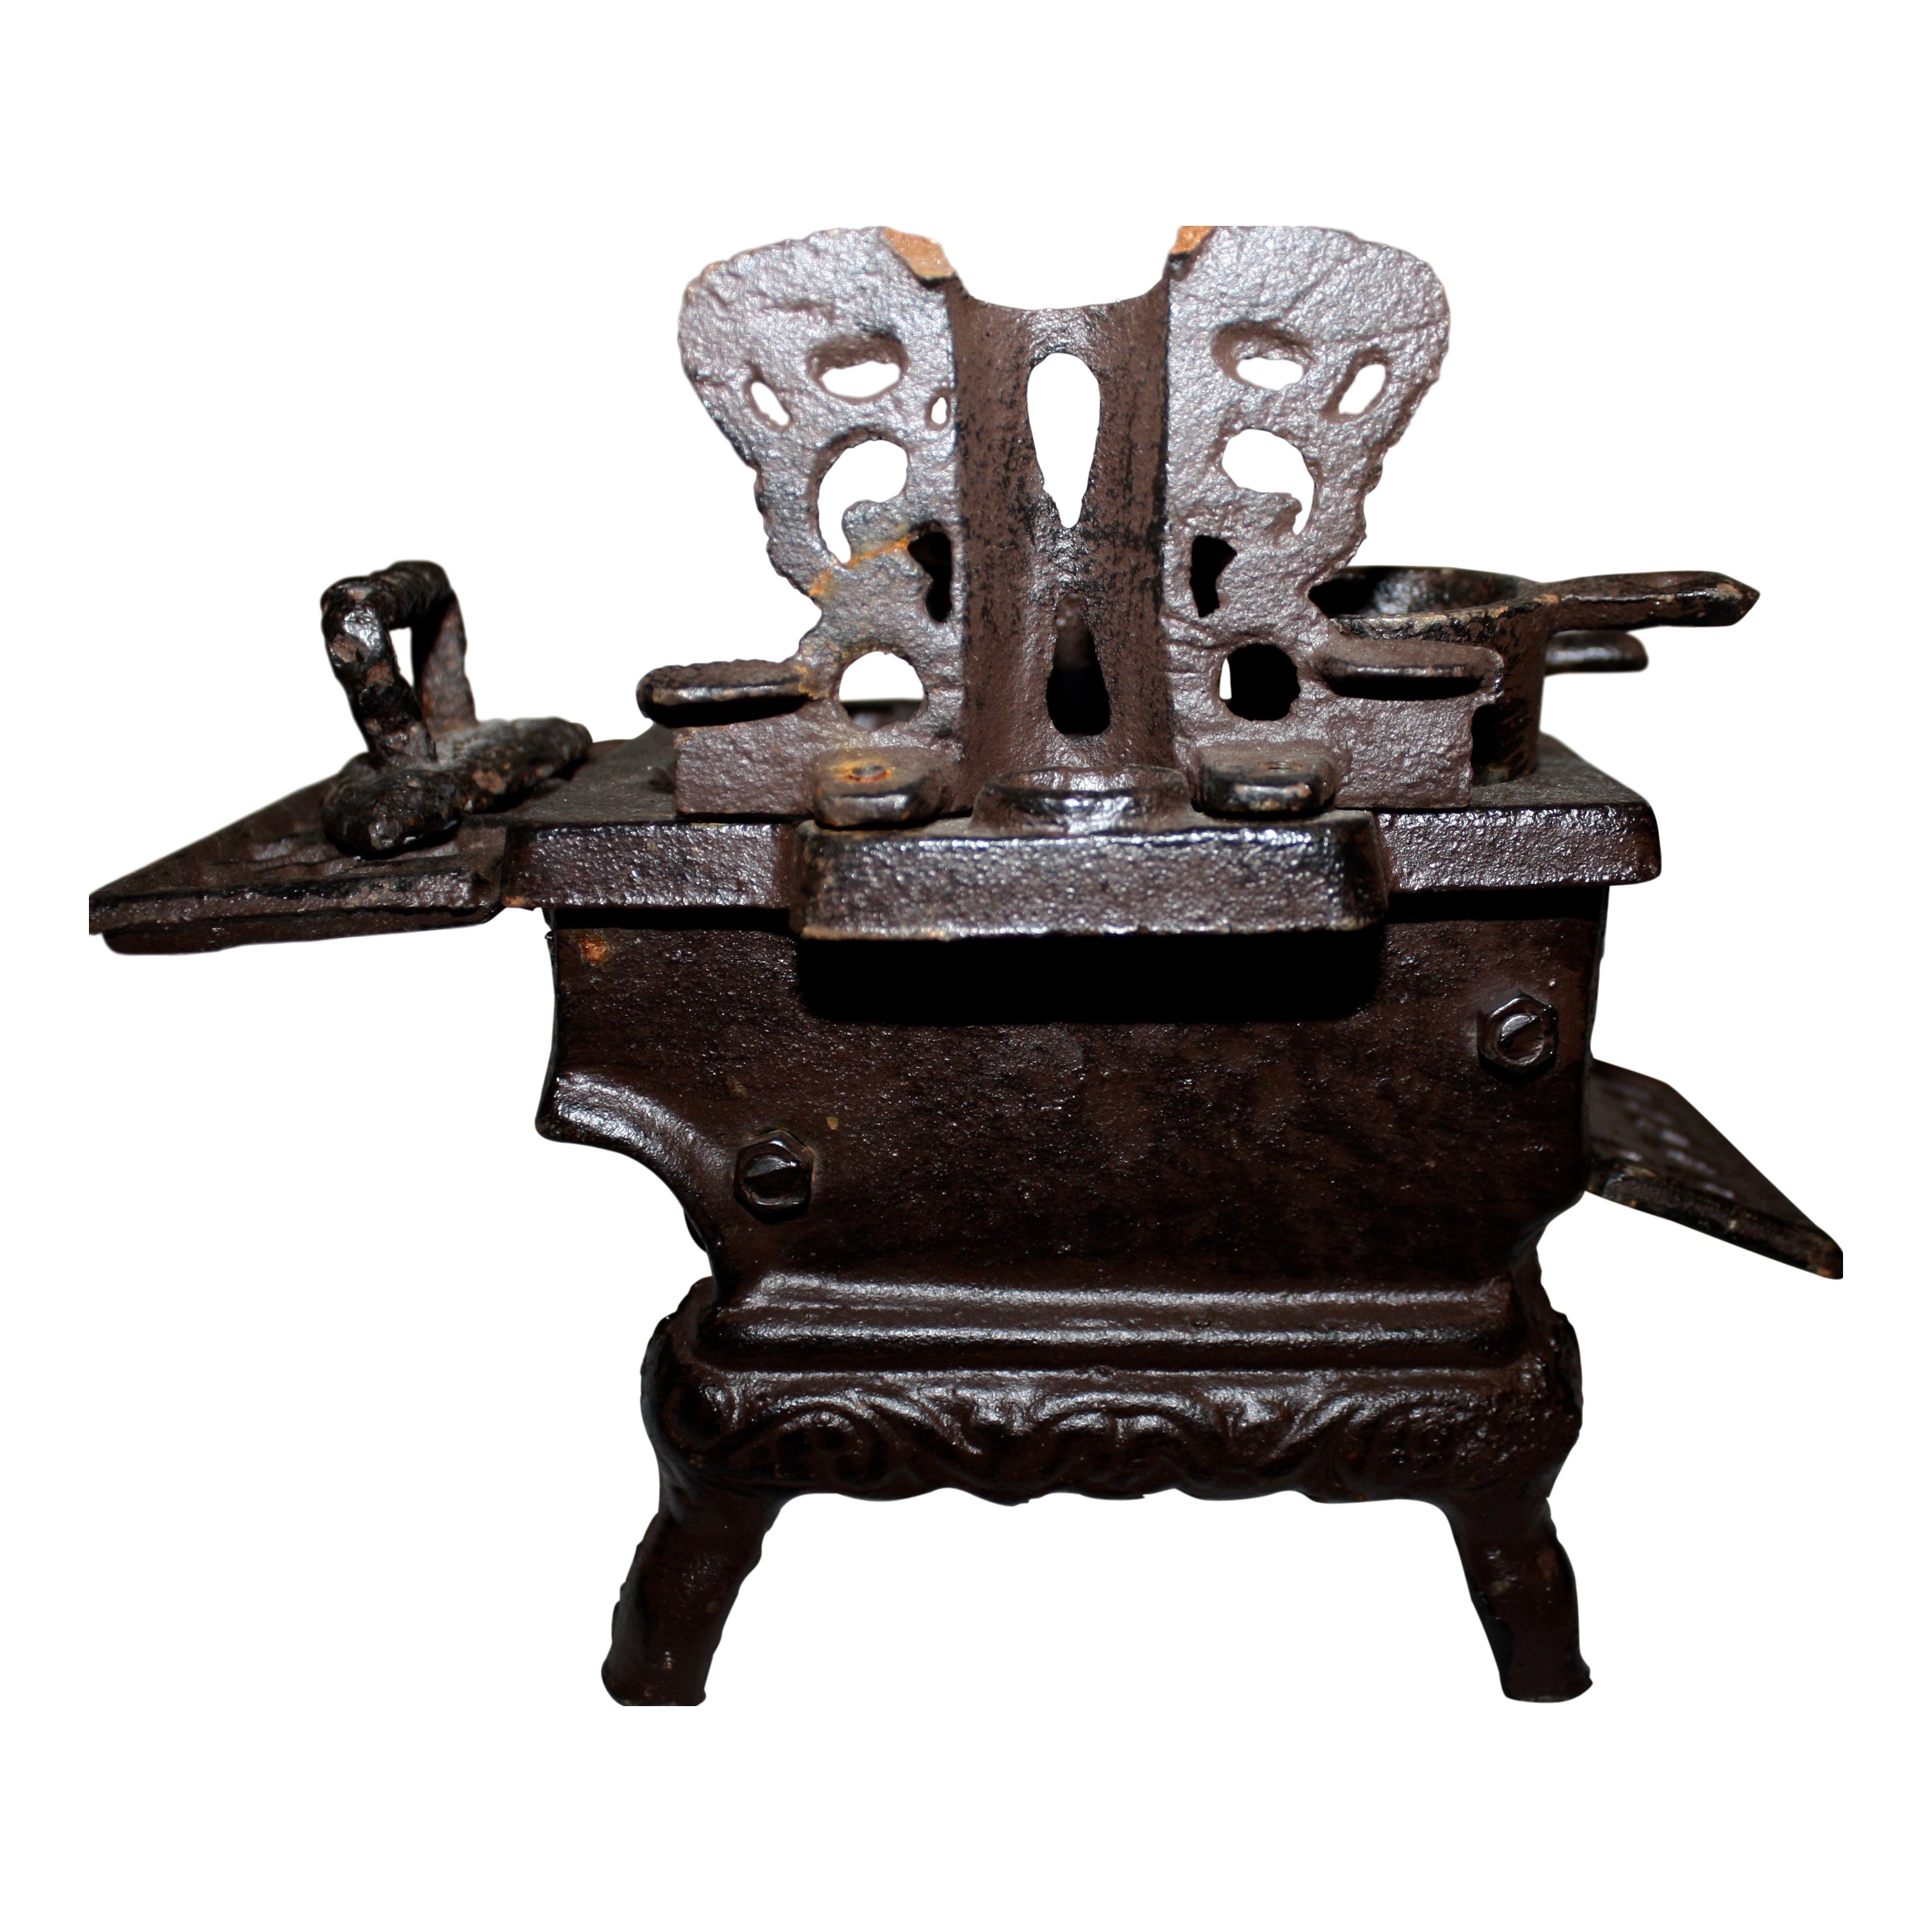 Miniature Cast Iron Stove with Accessories